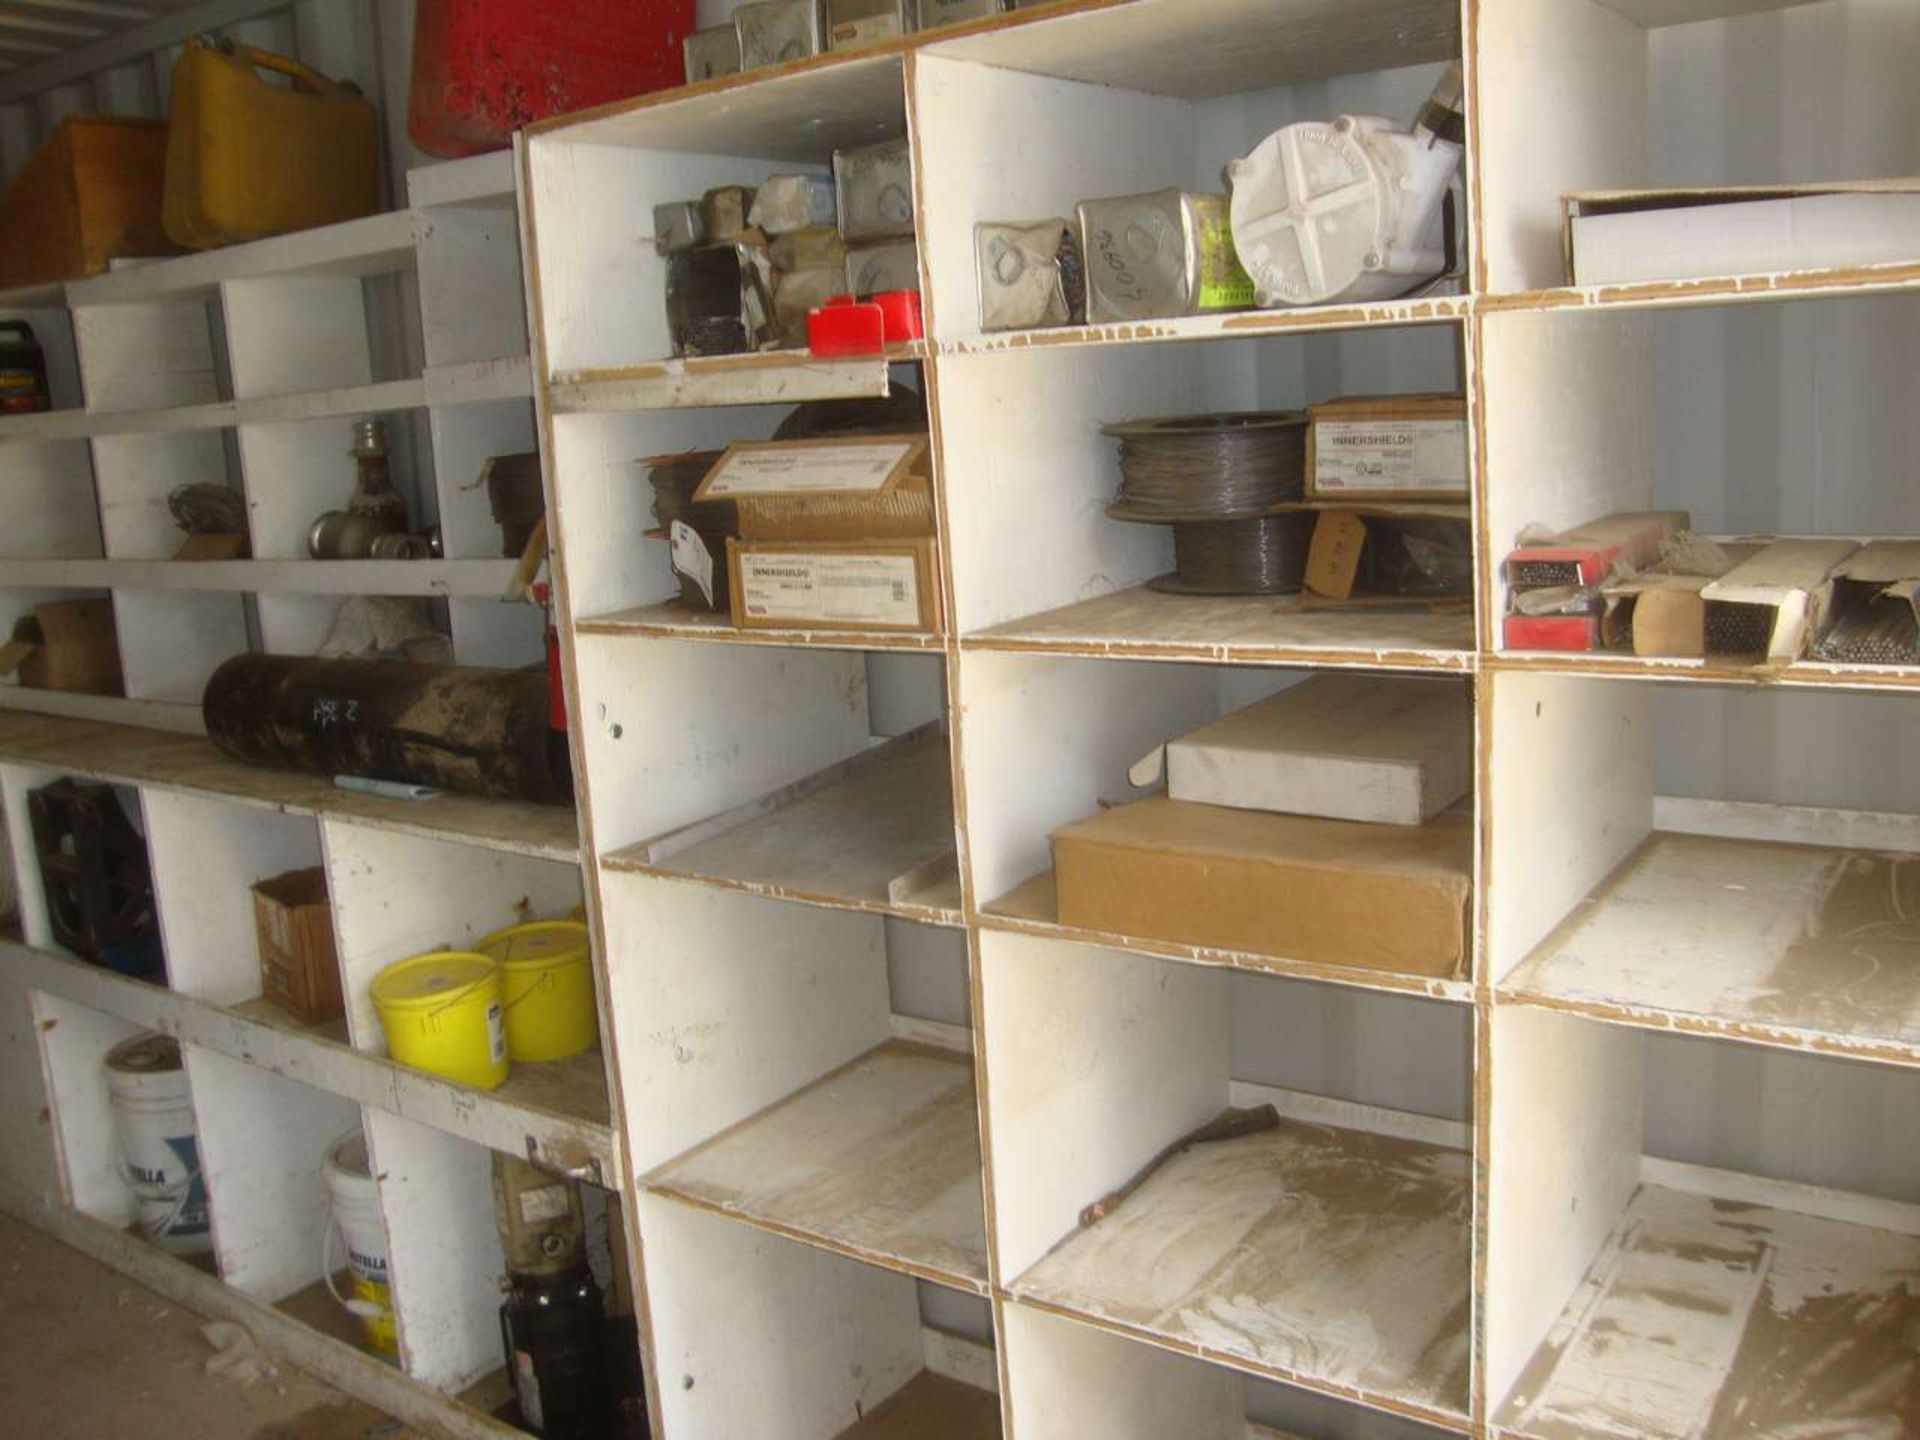 Lot of welding supplies and parts on wall